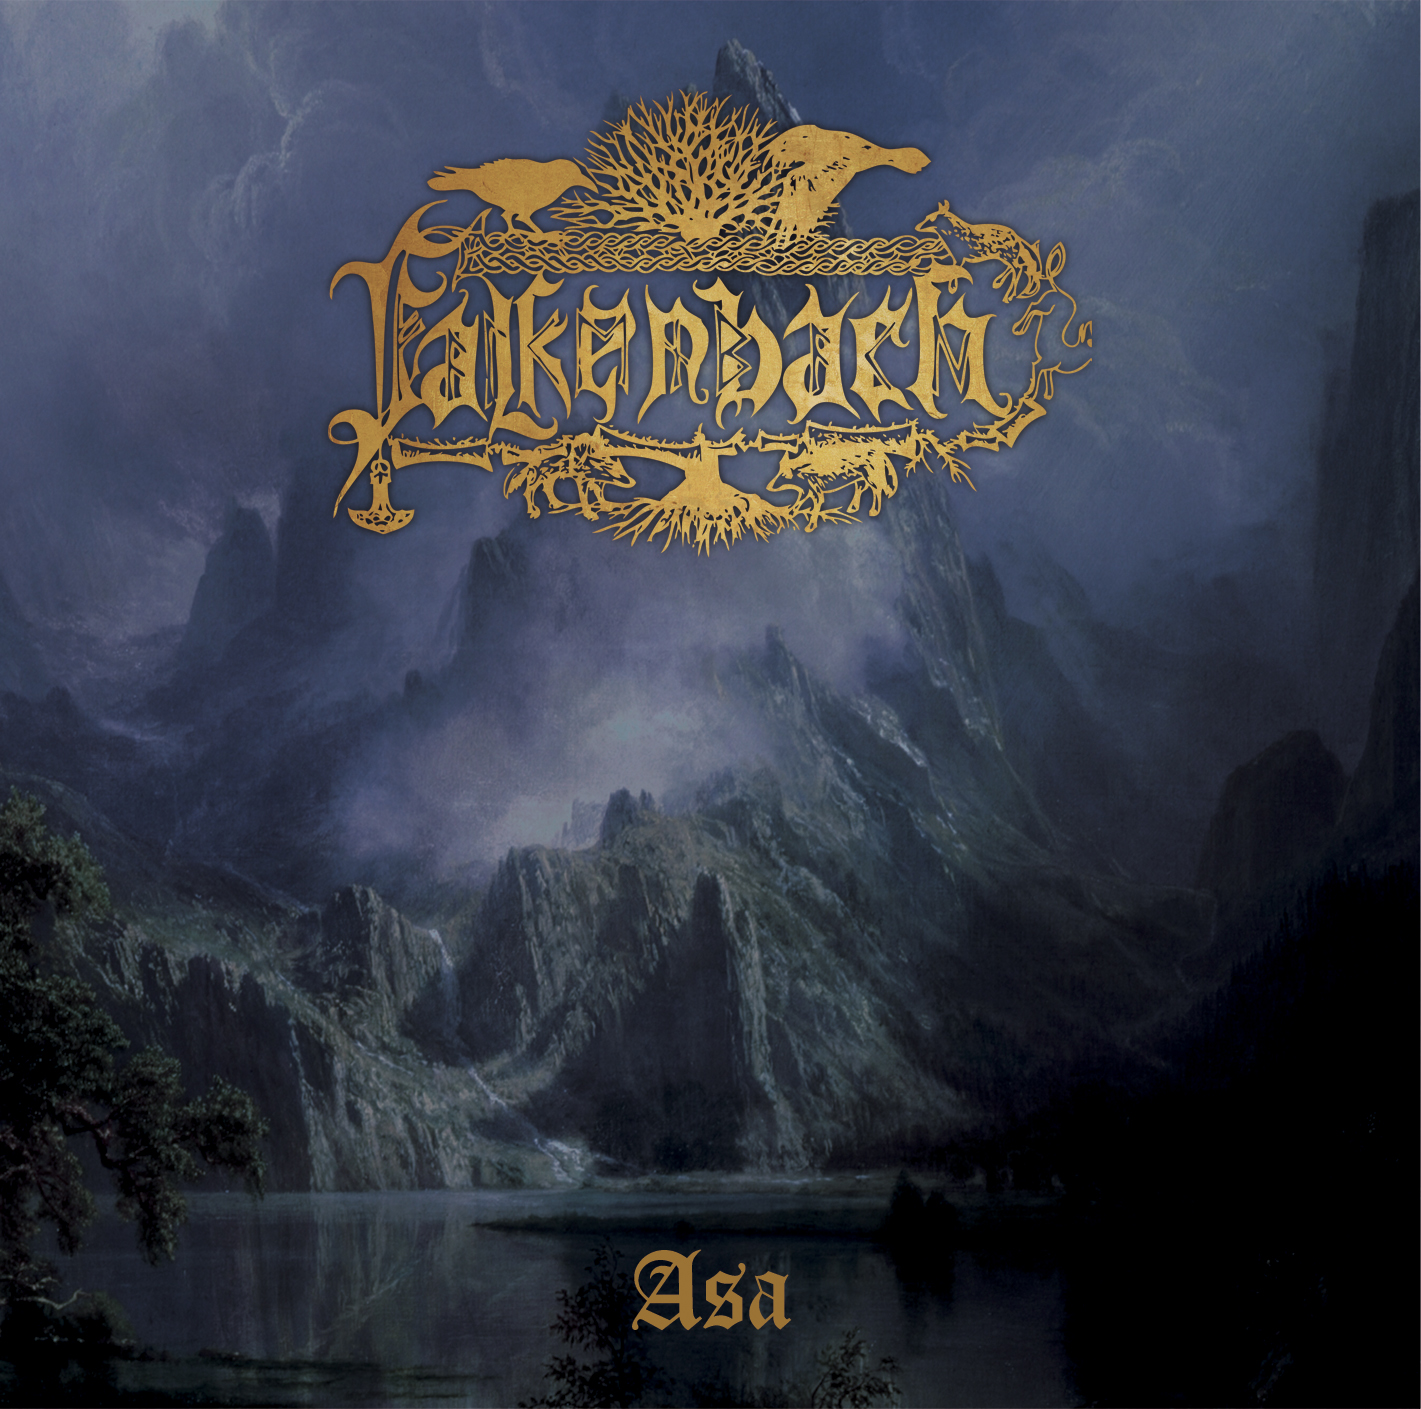 News Added Oct 27, 2013 Six months after the acclaimed vinyl-single “Eweroun”, Falkenbach release their sixth album “Asa”, the Heathen Metal forerunners’ worthy debut on Prophecy Productions. “Asa” is an all-out typical album for Falkenbach and combines elements from all creative periods of the project. It is characterised by a steady flow of both mellow […]